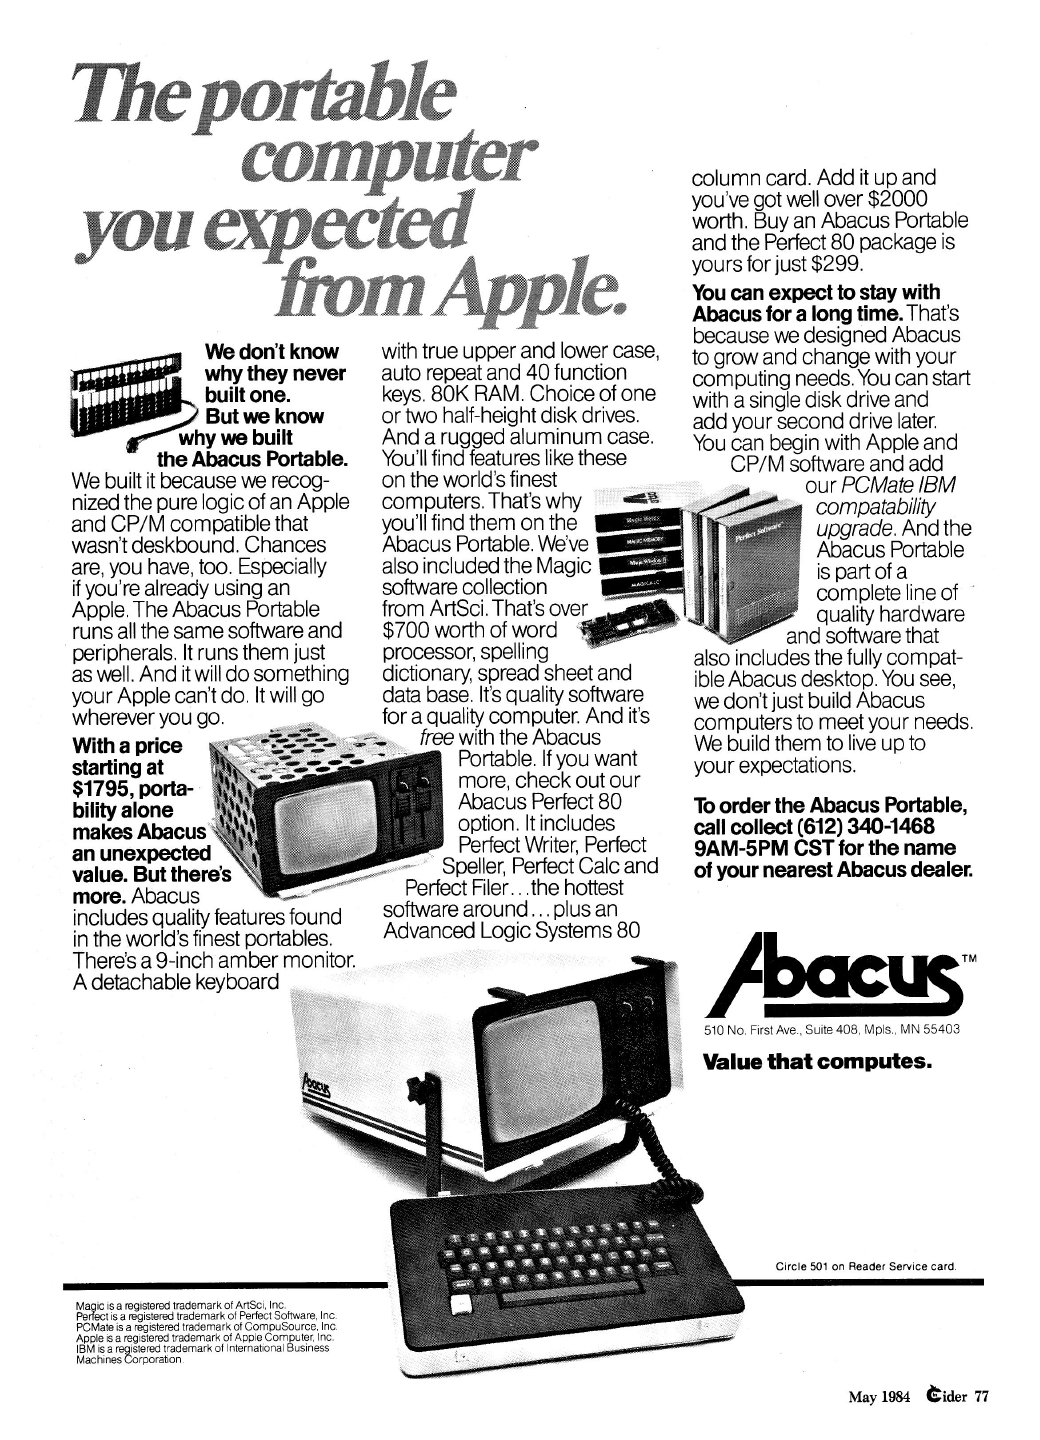 Abacus Portable